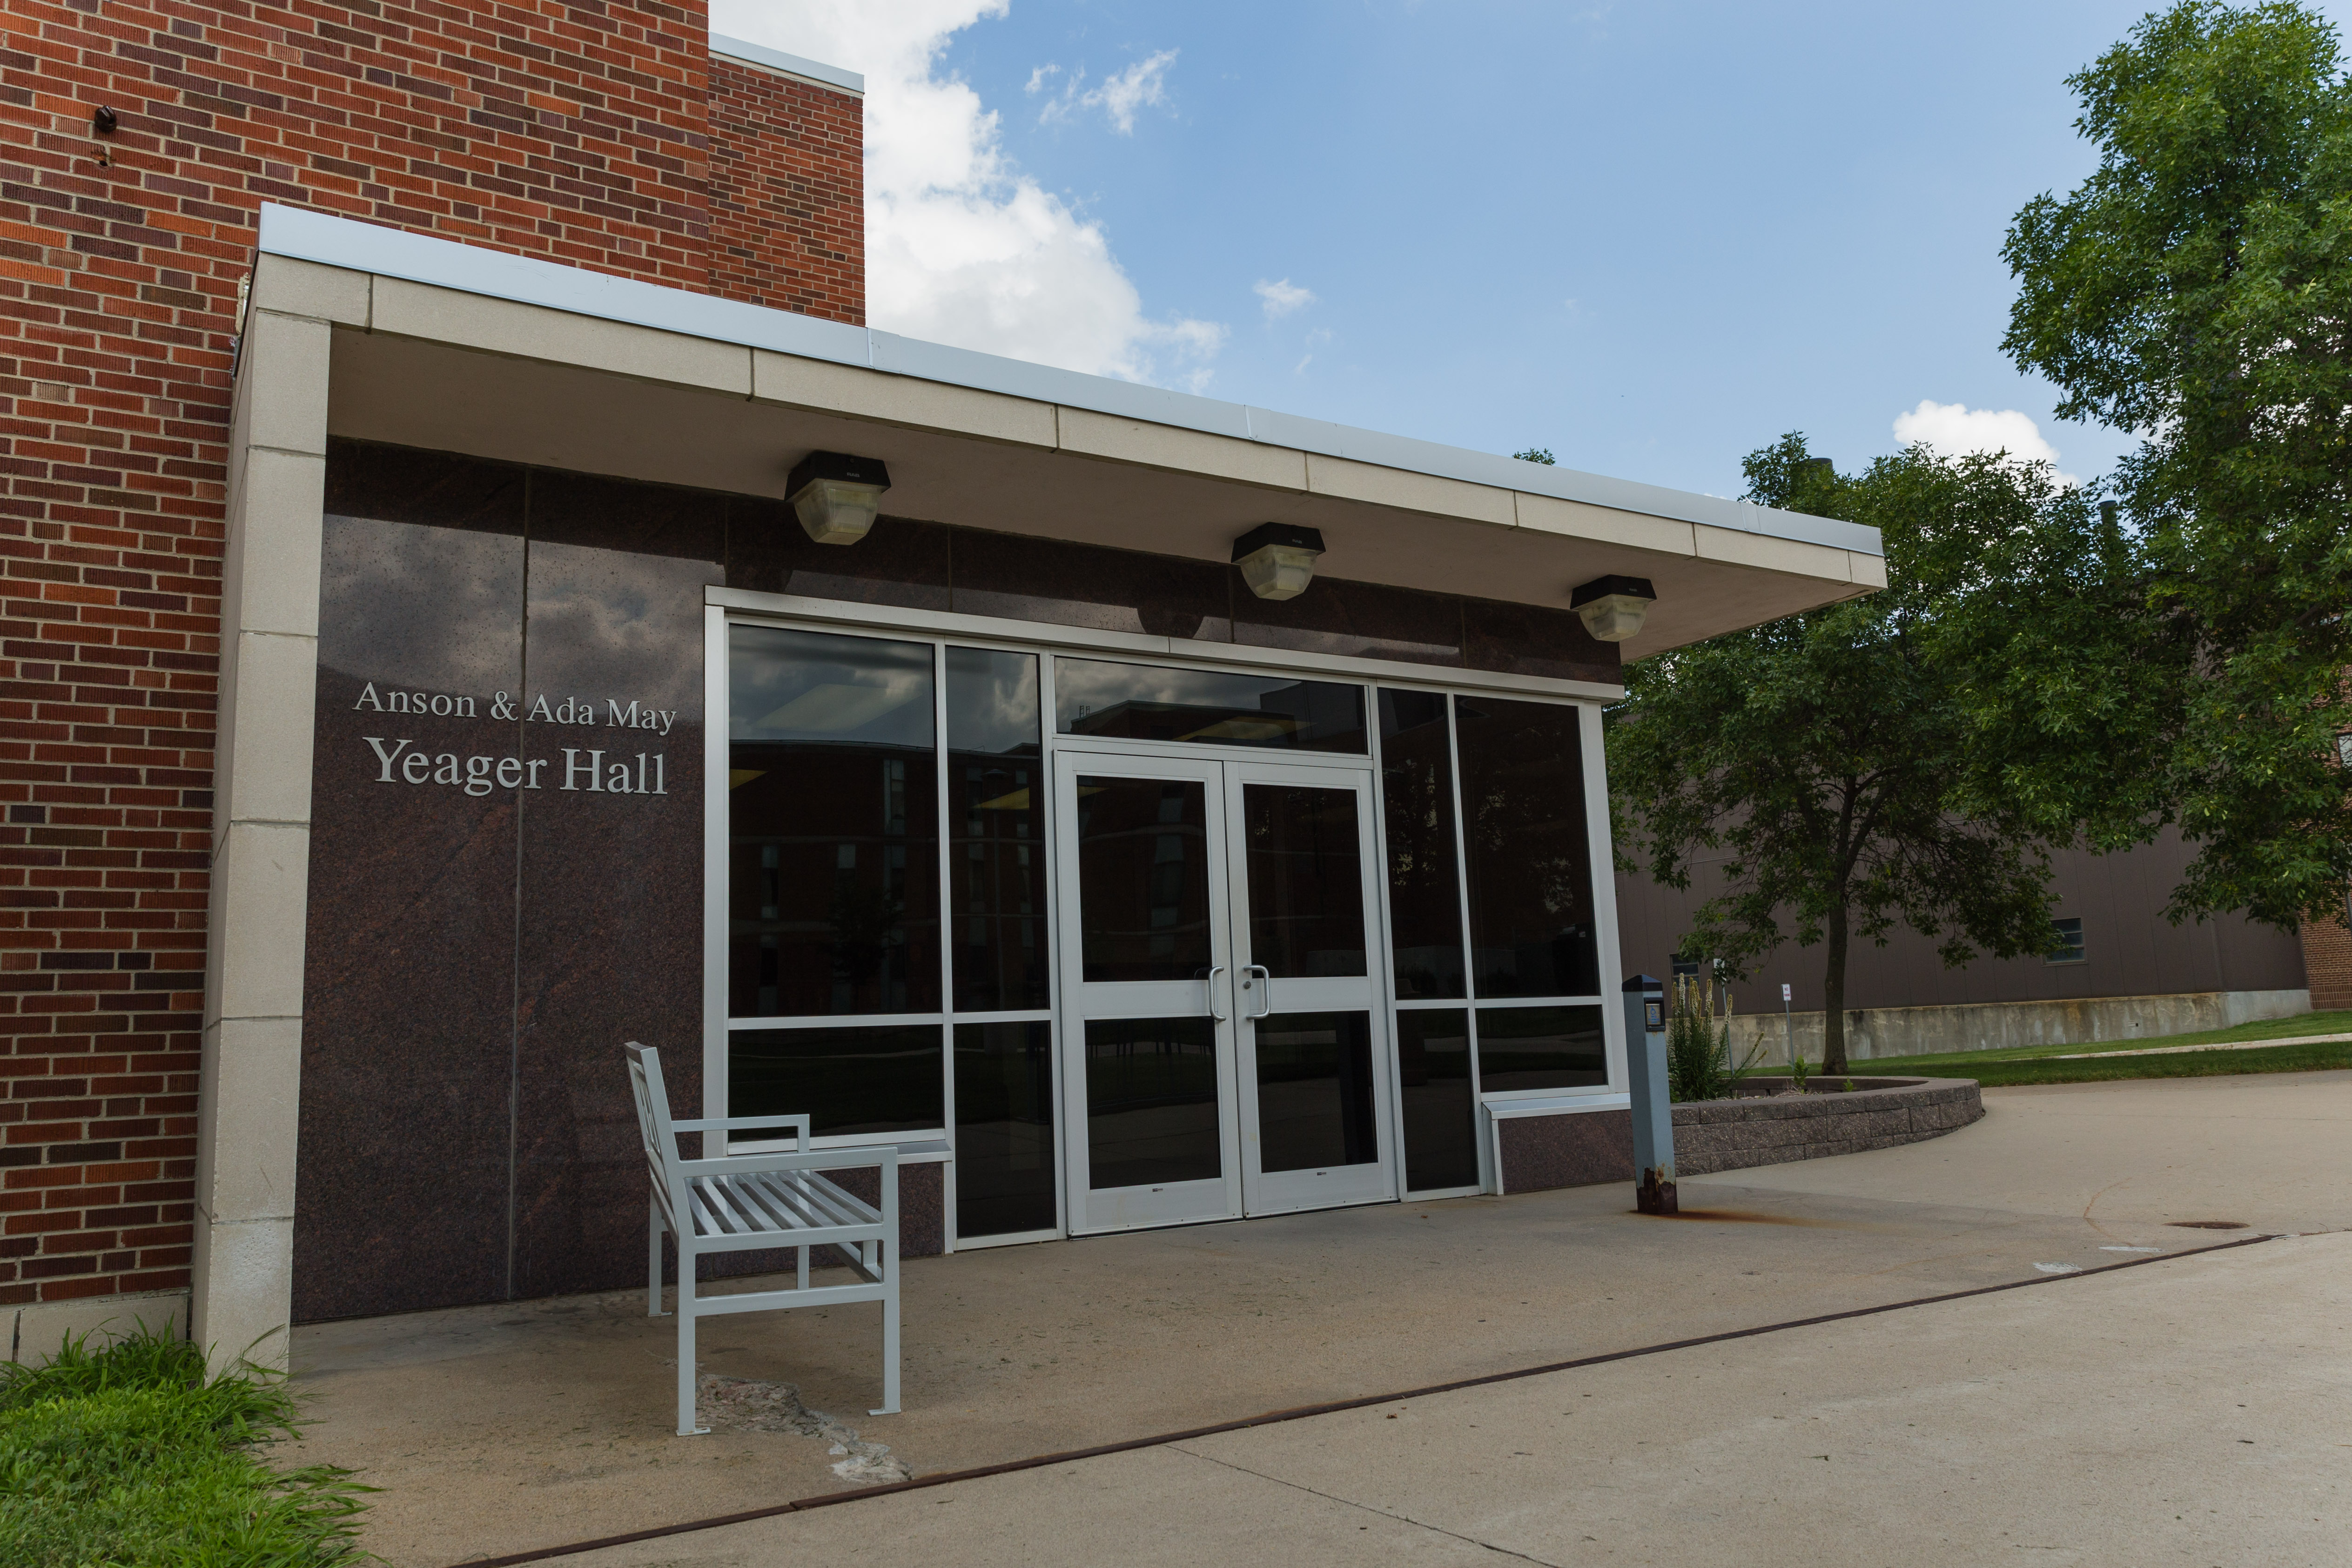 Yeager Hall